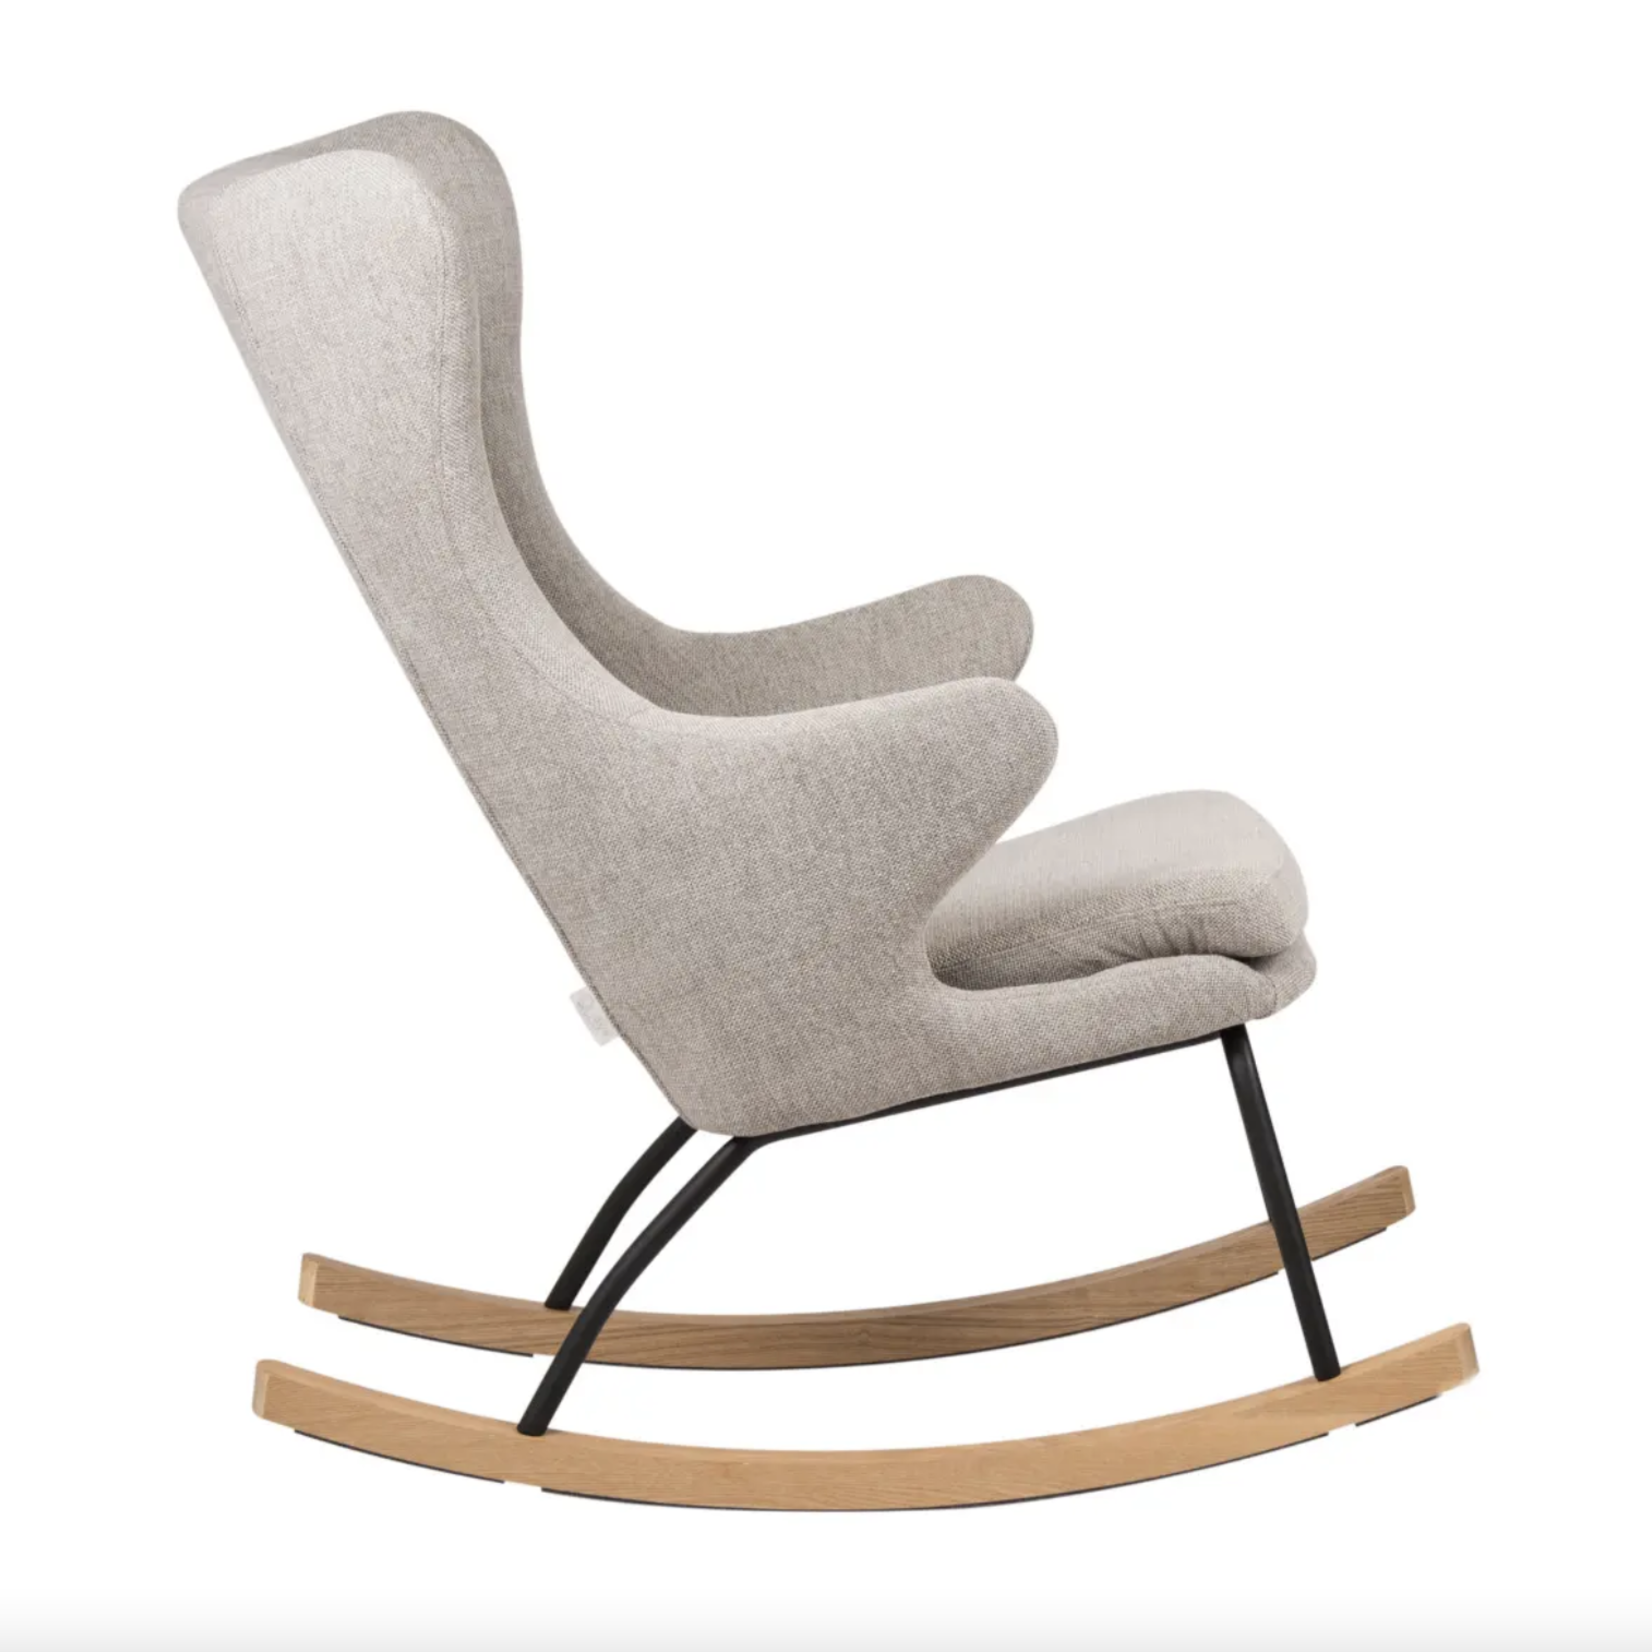 Quax Deluxe Rocking Chair-Sand Grey